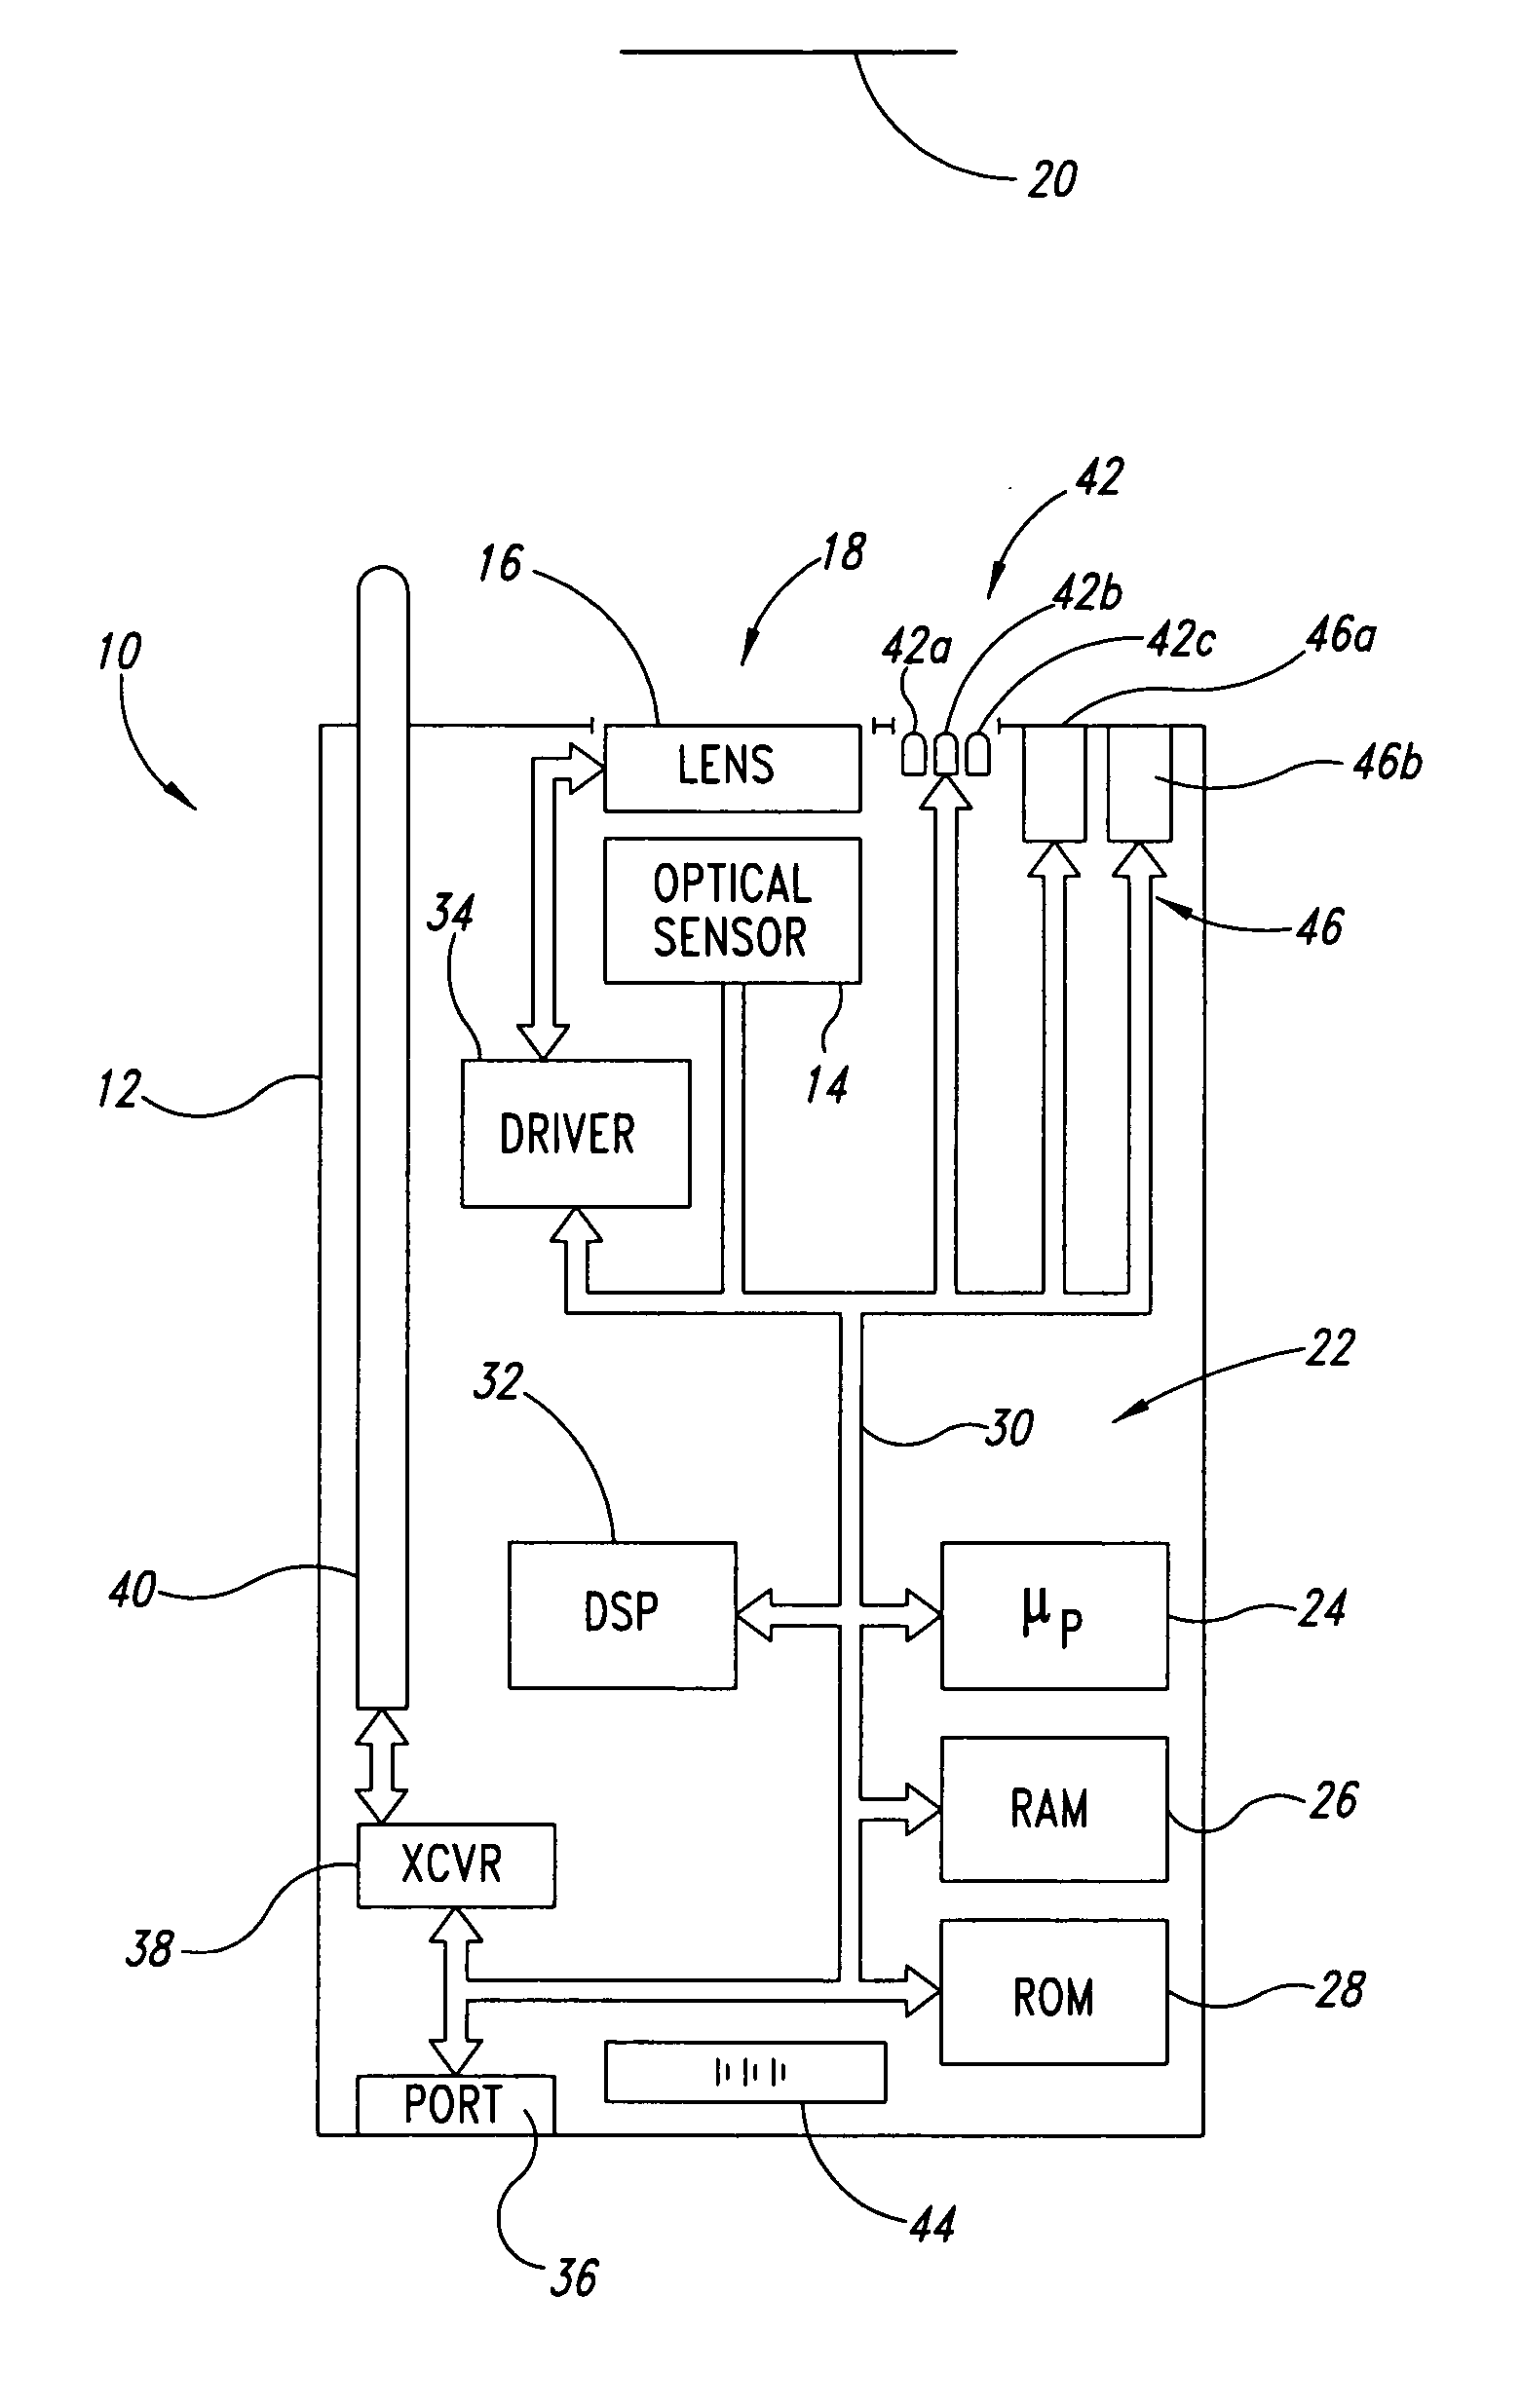 Autofocus barcode scanner and the like employing micro-fluidic lens